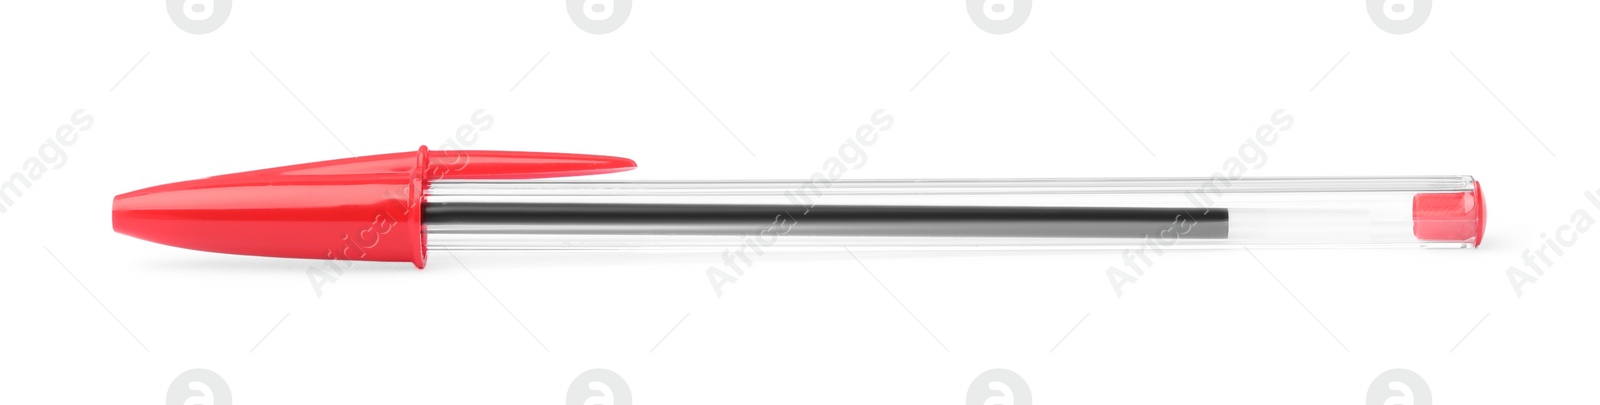 Photo of New red plastic pen isolated on white